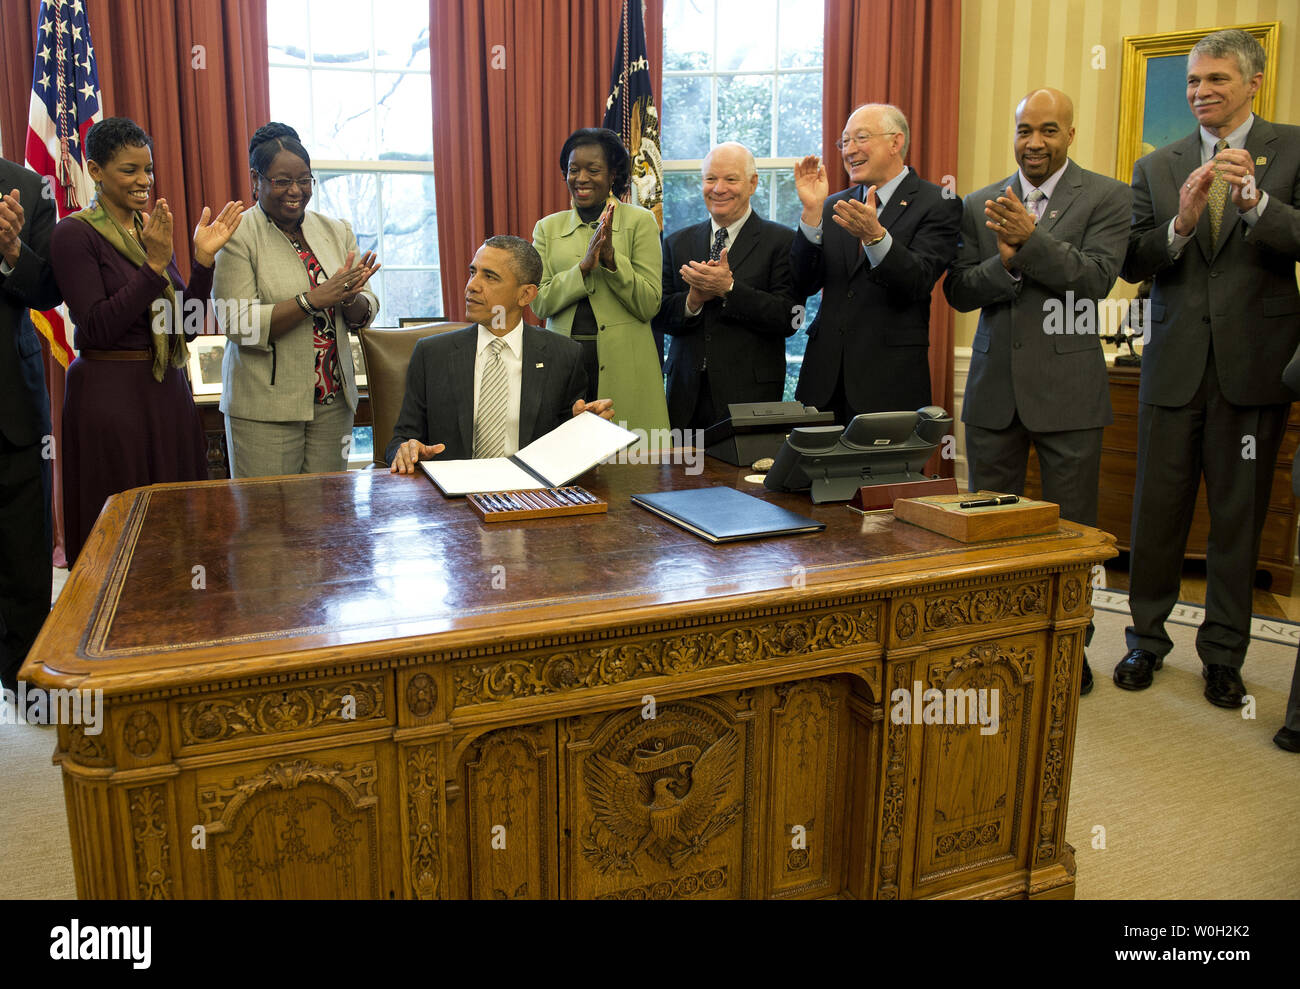 Guest applaud after President Barack Obama signed a bill designating the Harriet Tubman Underground Railroad, in Maryland, a National Monument during a bill signing ceremony in the Oval Office at the White House on March 25, 2013 in Washington, D.C. President Obama signed a series of bills designating five new National Monuments, including, Rio Grande del Norte, in New Mexico, the First State Monument in Delaware, the Harriet Tubman Underground Railroad in Maryland, the Charles Young Buffalo Soldiers in Ohio and the San Juan Islands in Washington. UPI/Kevin Dietsch Stock Photo